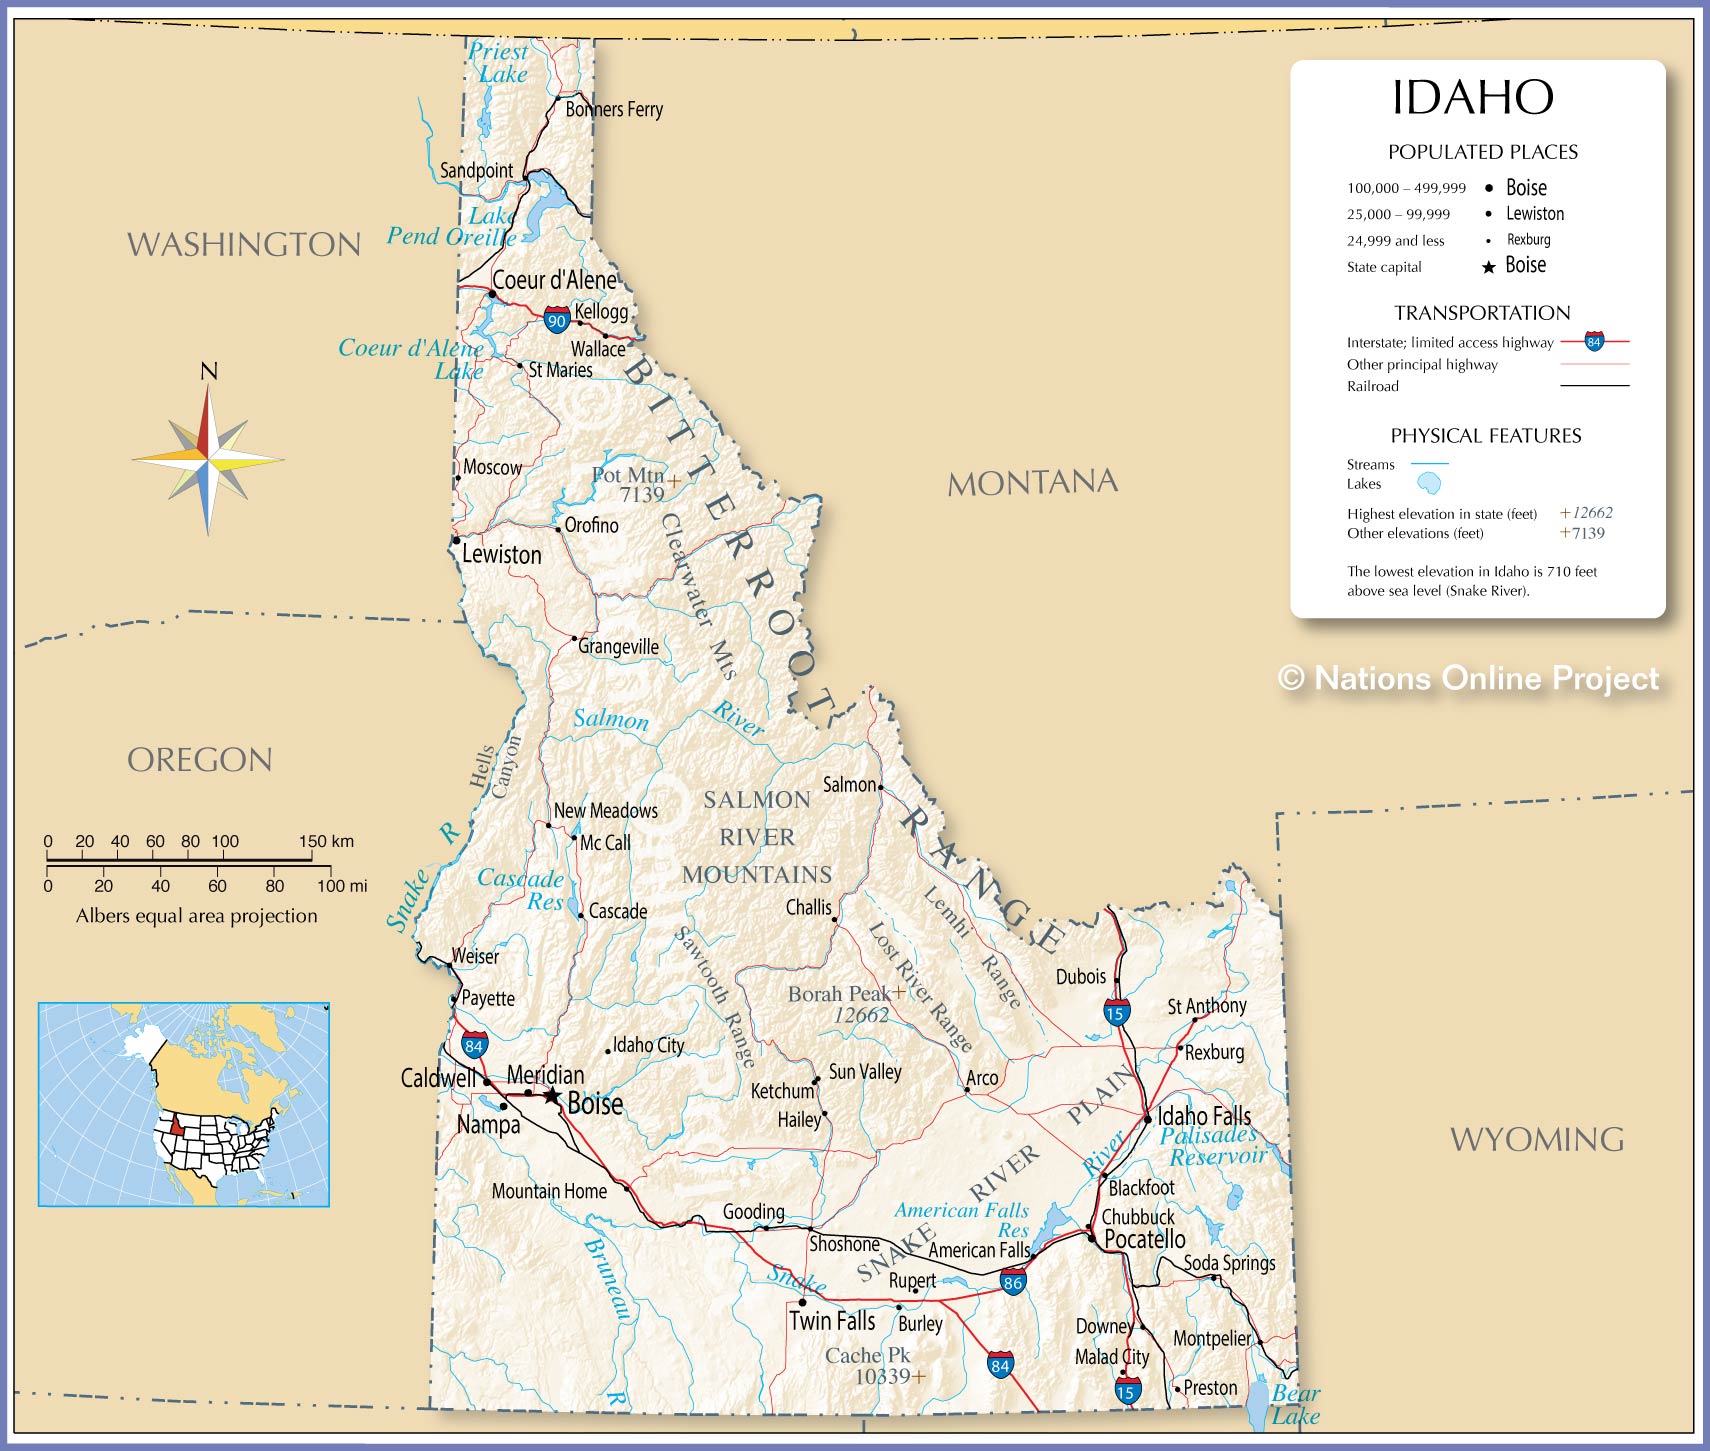 idaho airports boise engage nations geography hertenstein